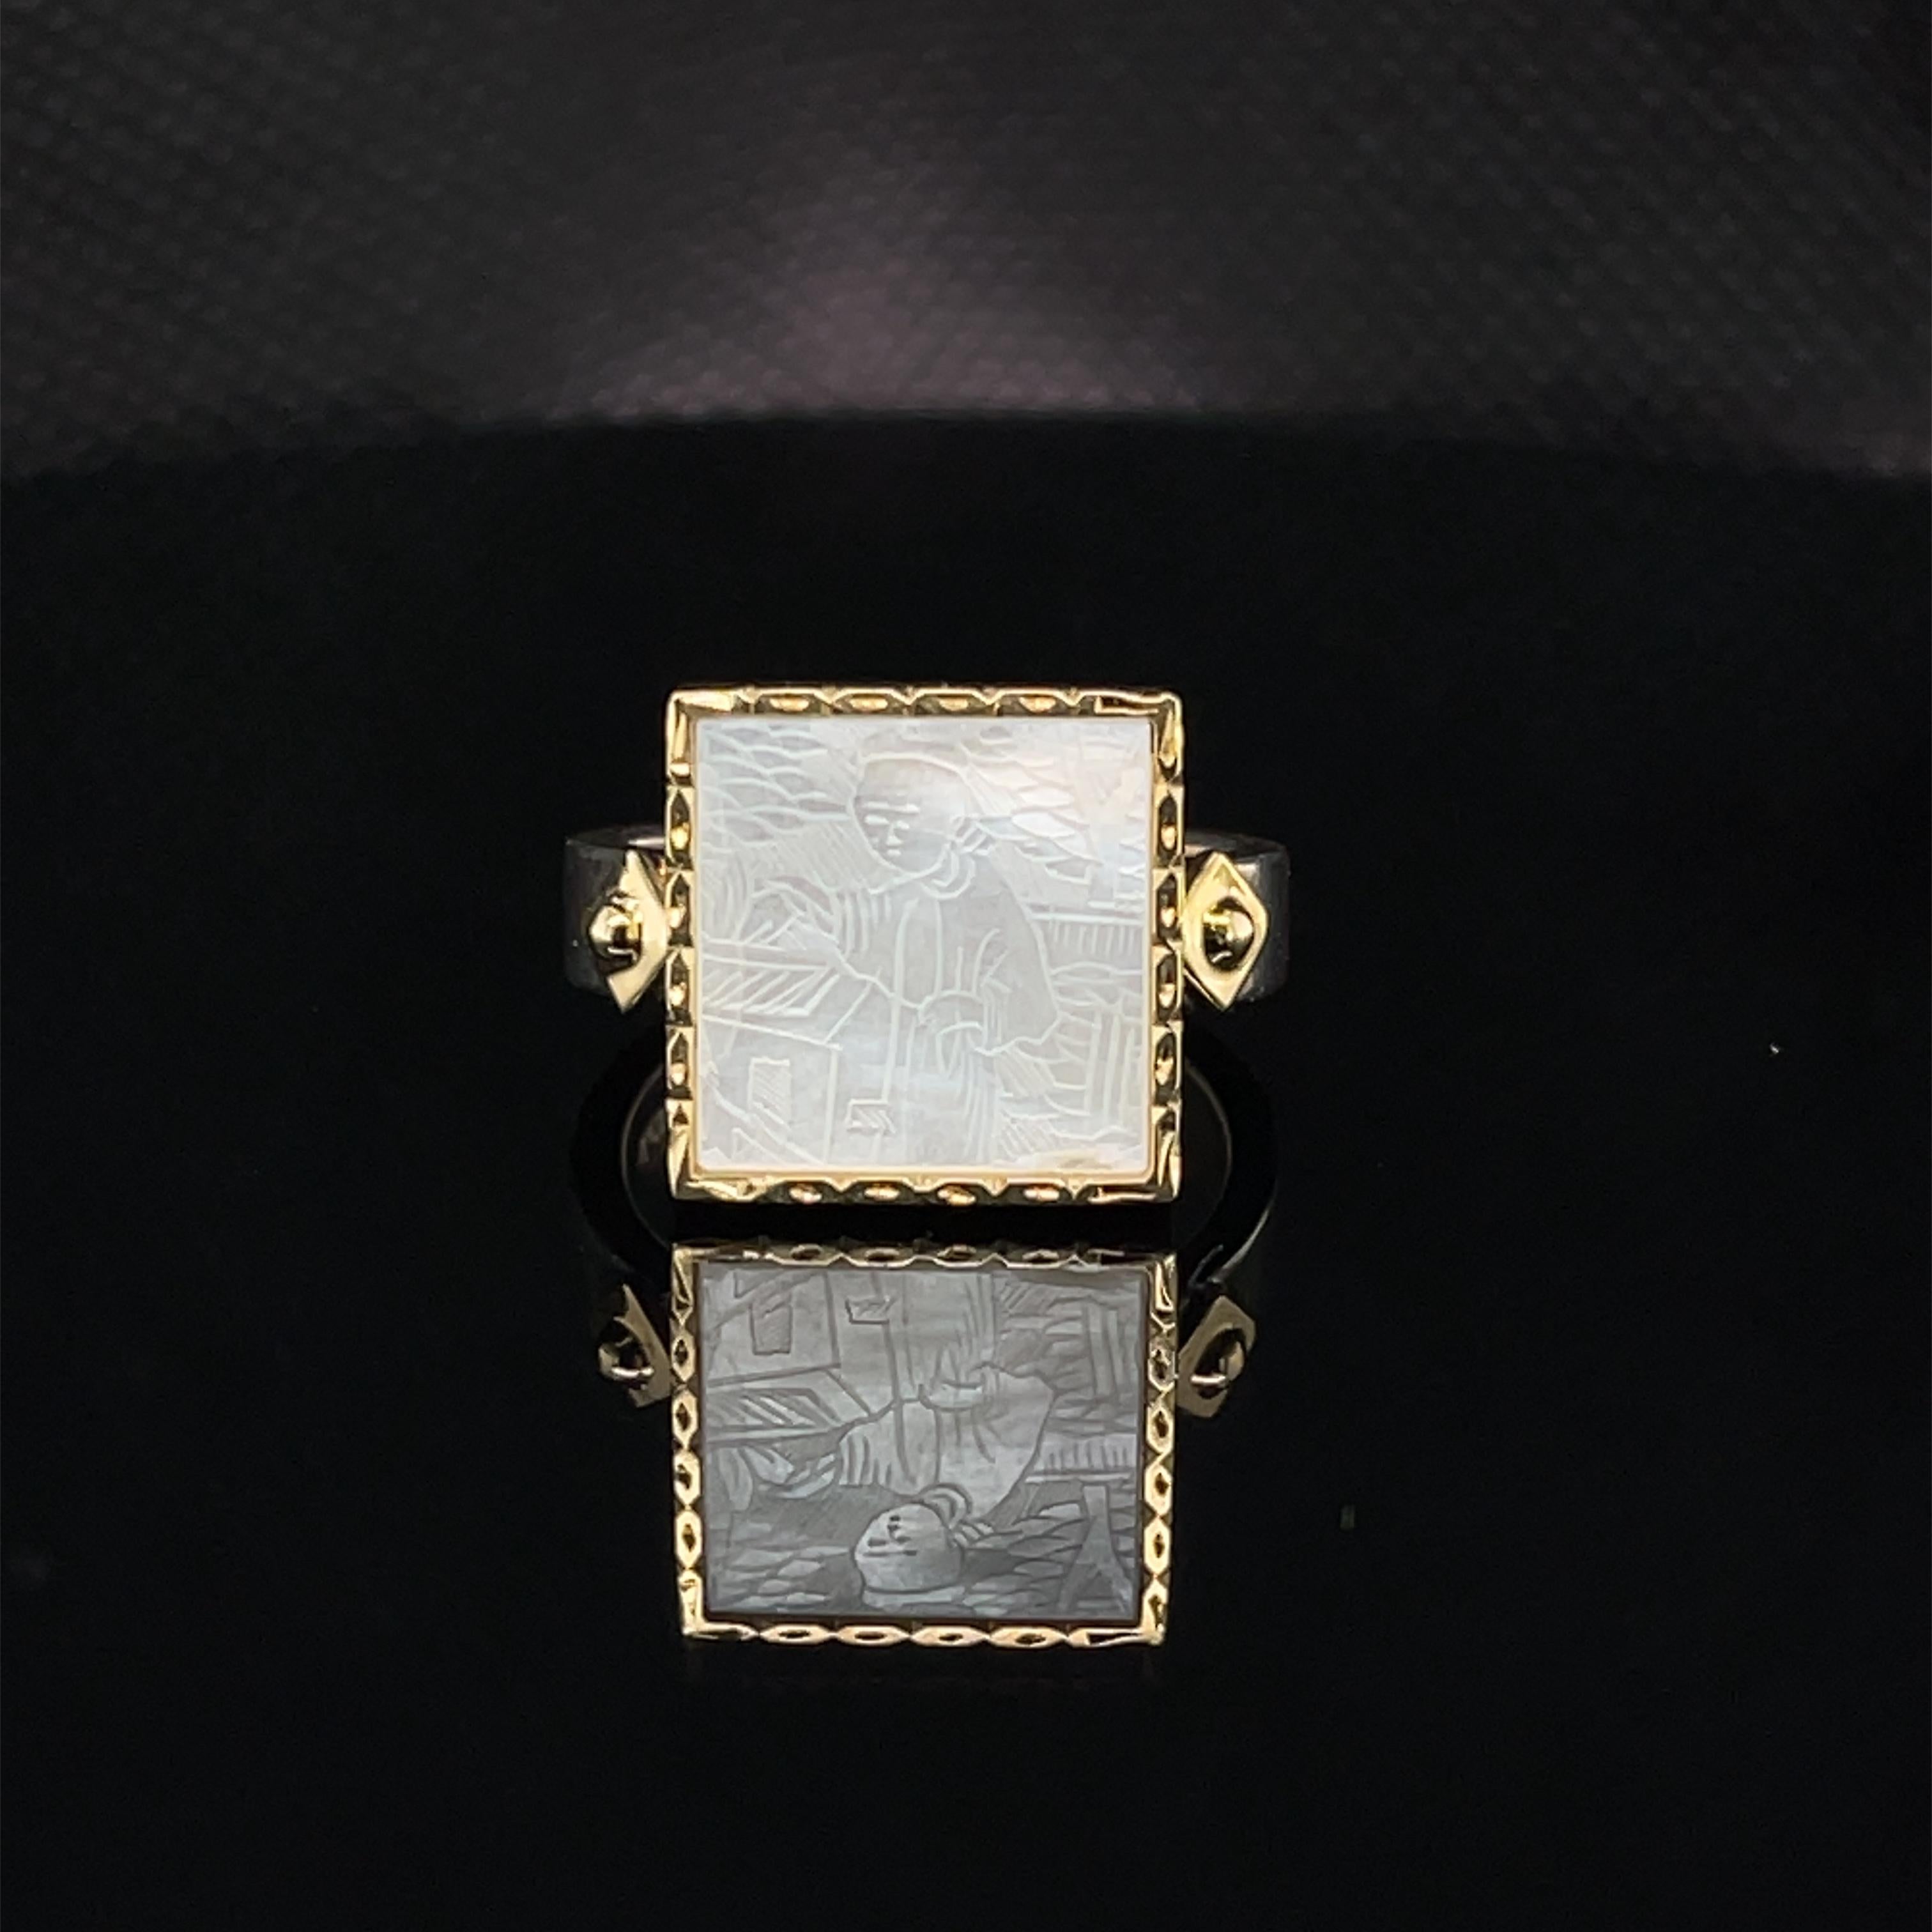 This elegant ring features an antique, mother-of-pearl Chinese gambling counter dating back to the 18th Century. The square gaming counter is set in a beautifully engraved 18k yellow gold frame. 18k yellow gold accents adorn the sterling silver band